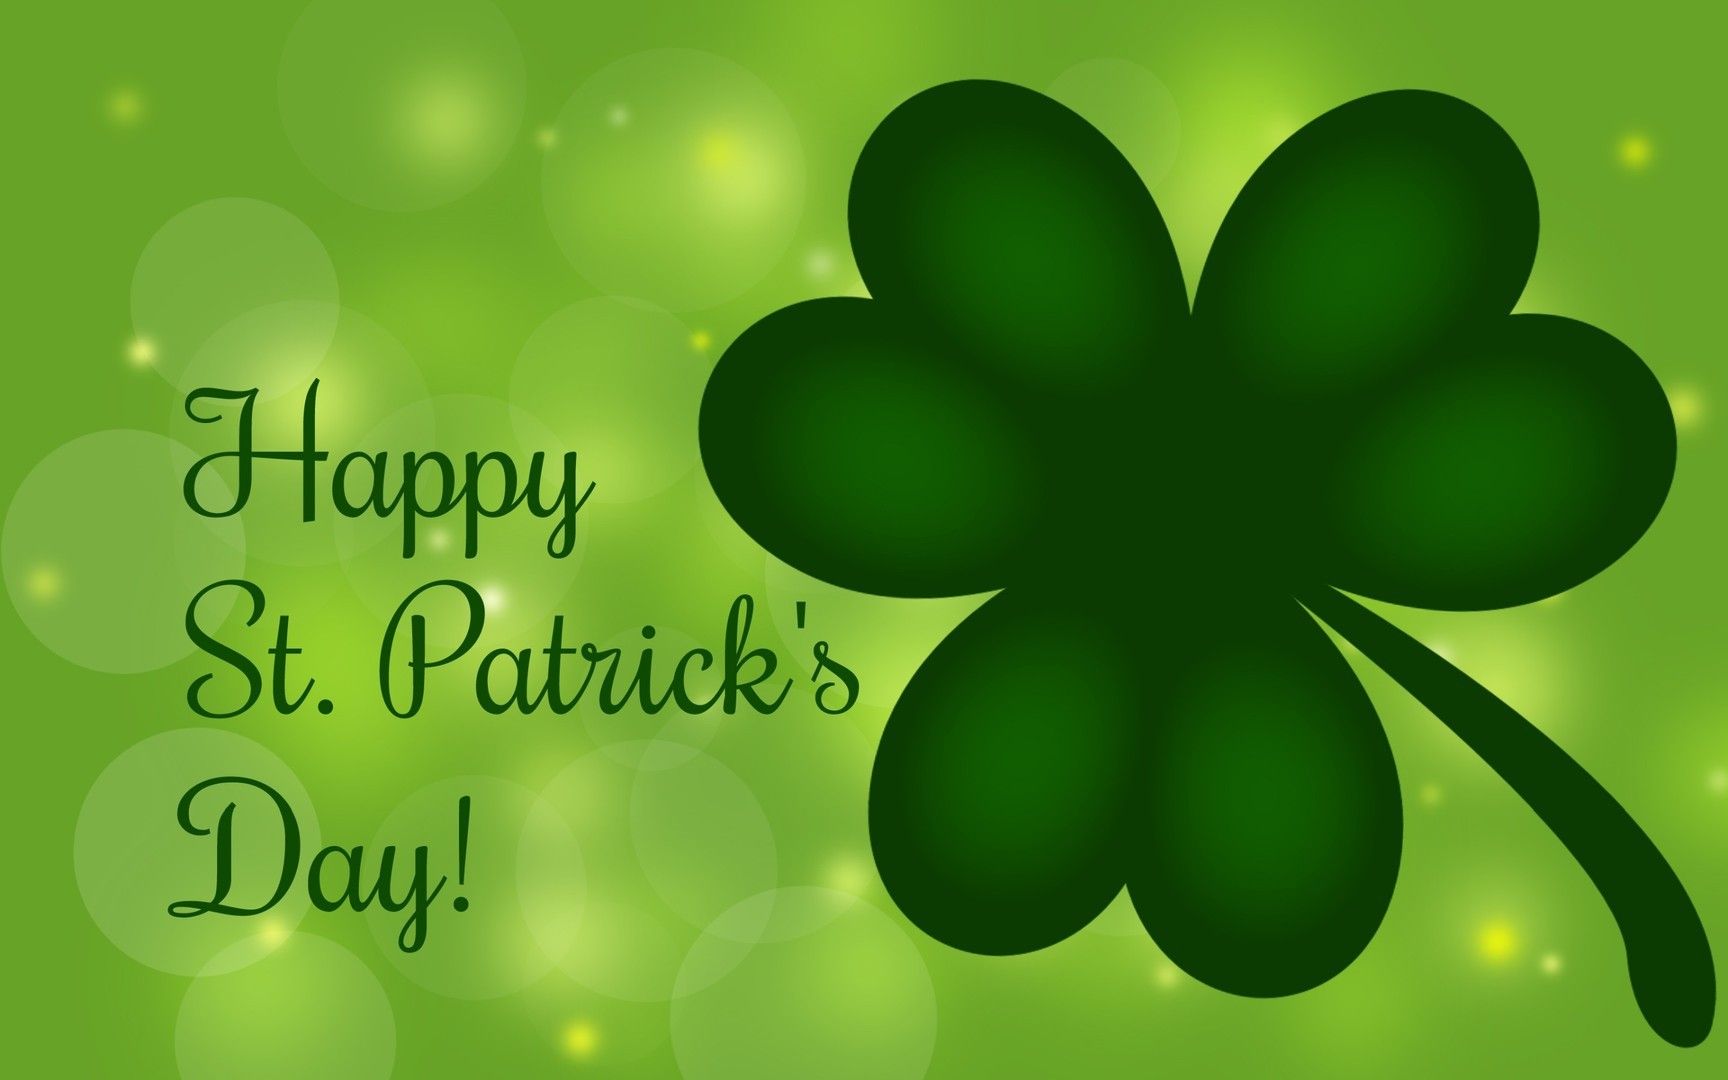 Happy St. Patrick's Day From The Temple Team!. St patrick's day photo, St patricks day picture, St patricks day wallpaper